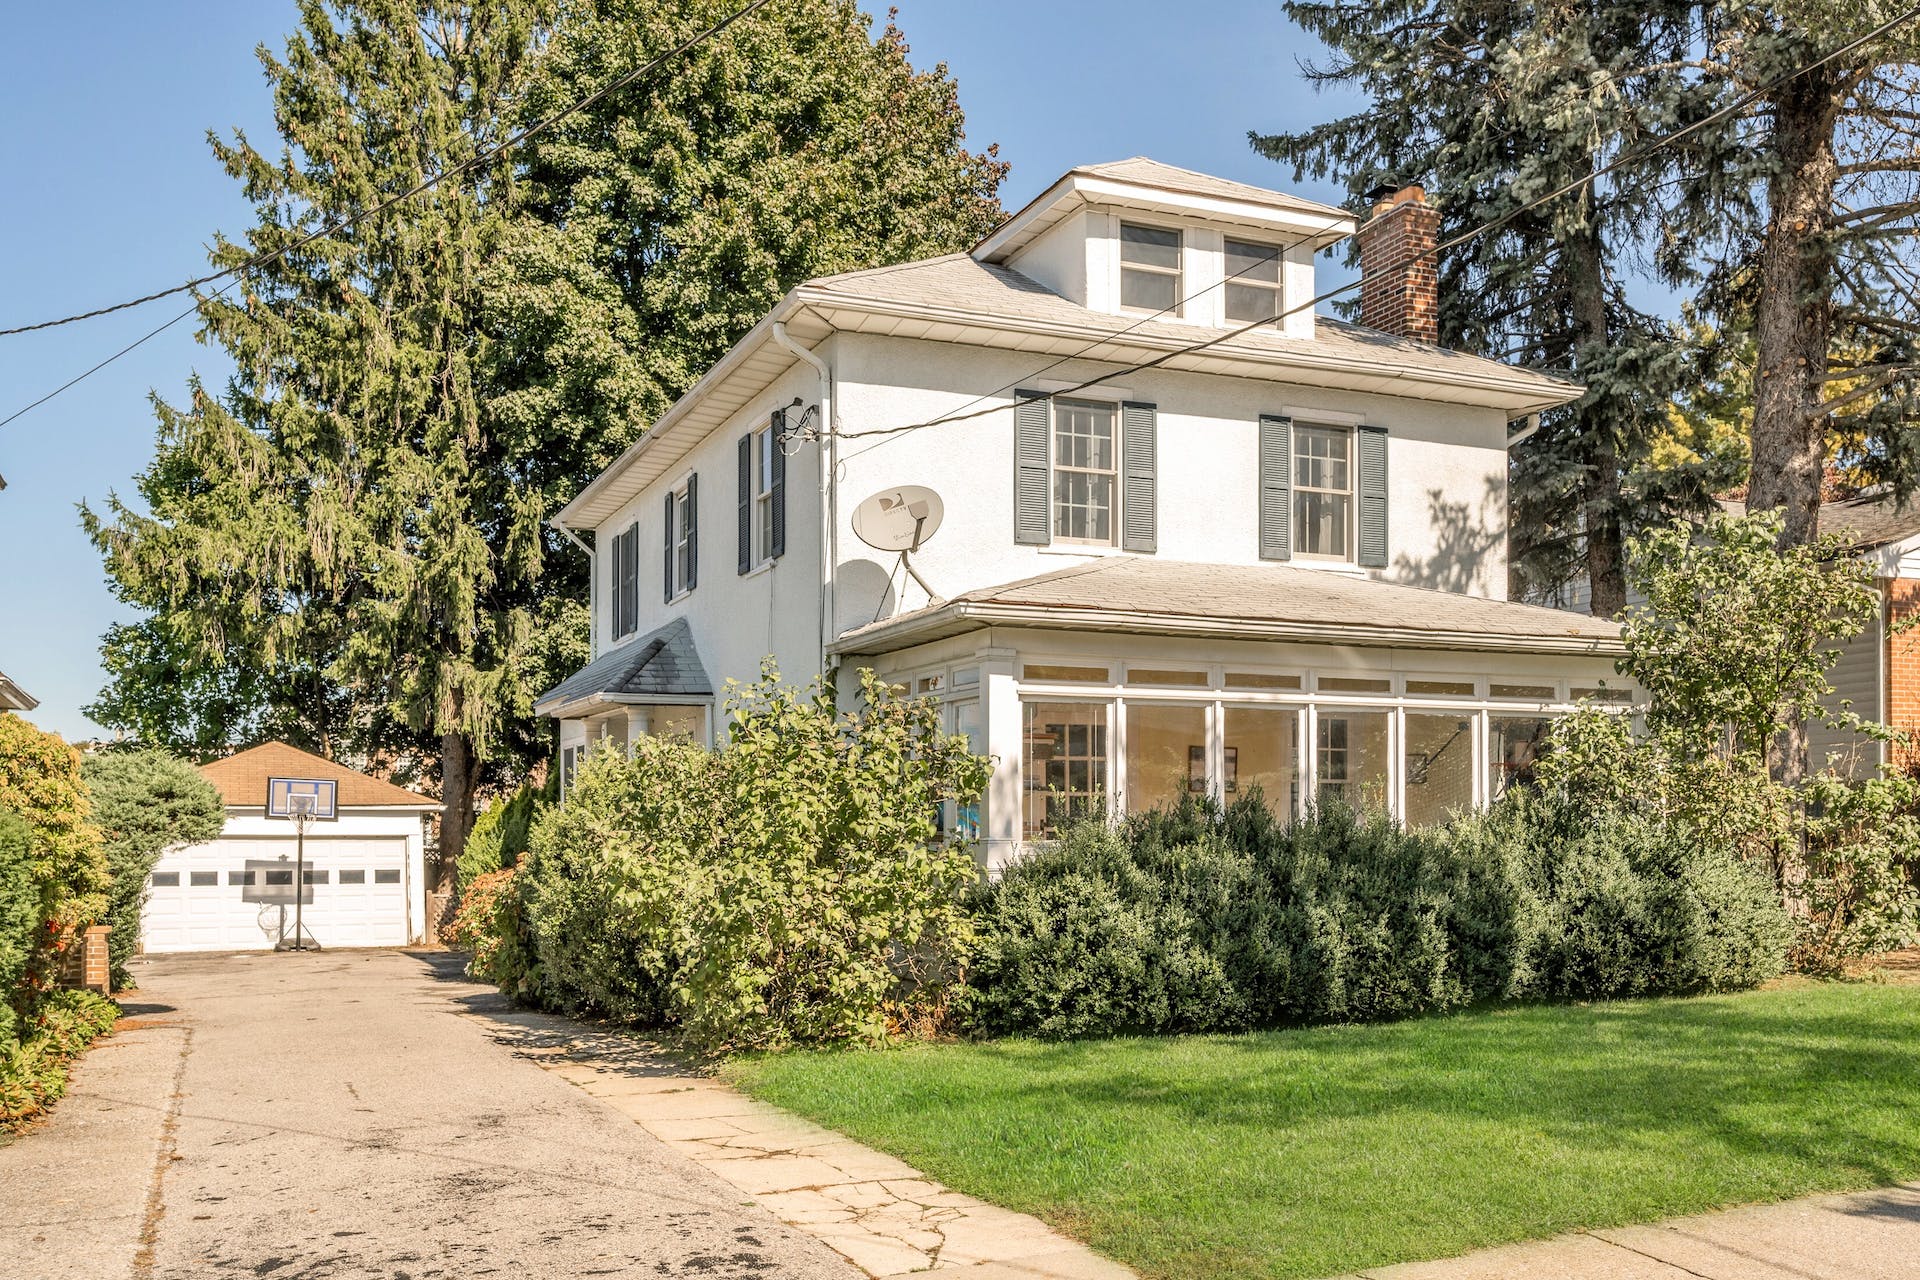 Public Open House – Sunday October 15th 2022 – 12 PM to 2 PM – 11 Park Ave Tarrytown NY 10591